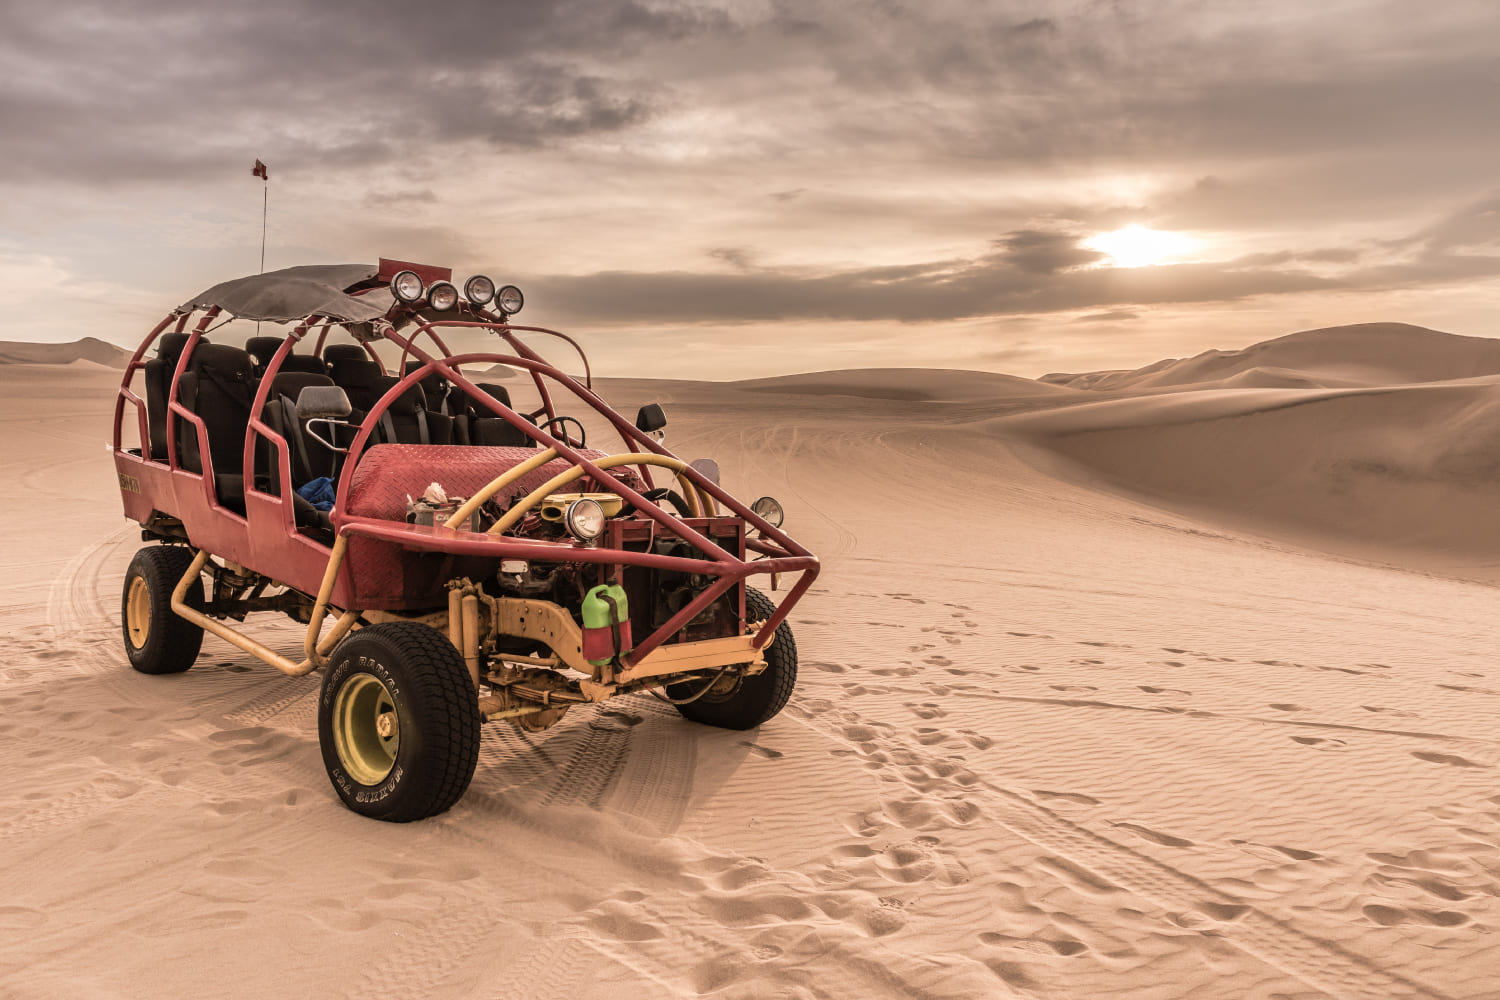 ADVENTURE SPORTS IN THE HUACACHINA OASIS